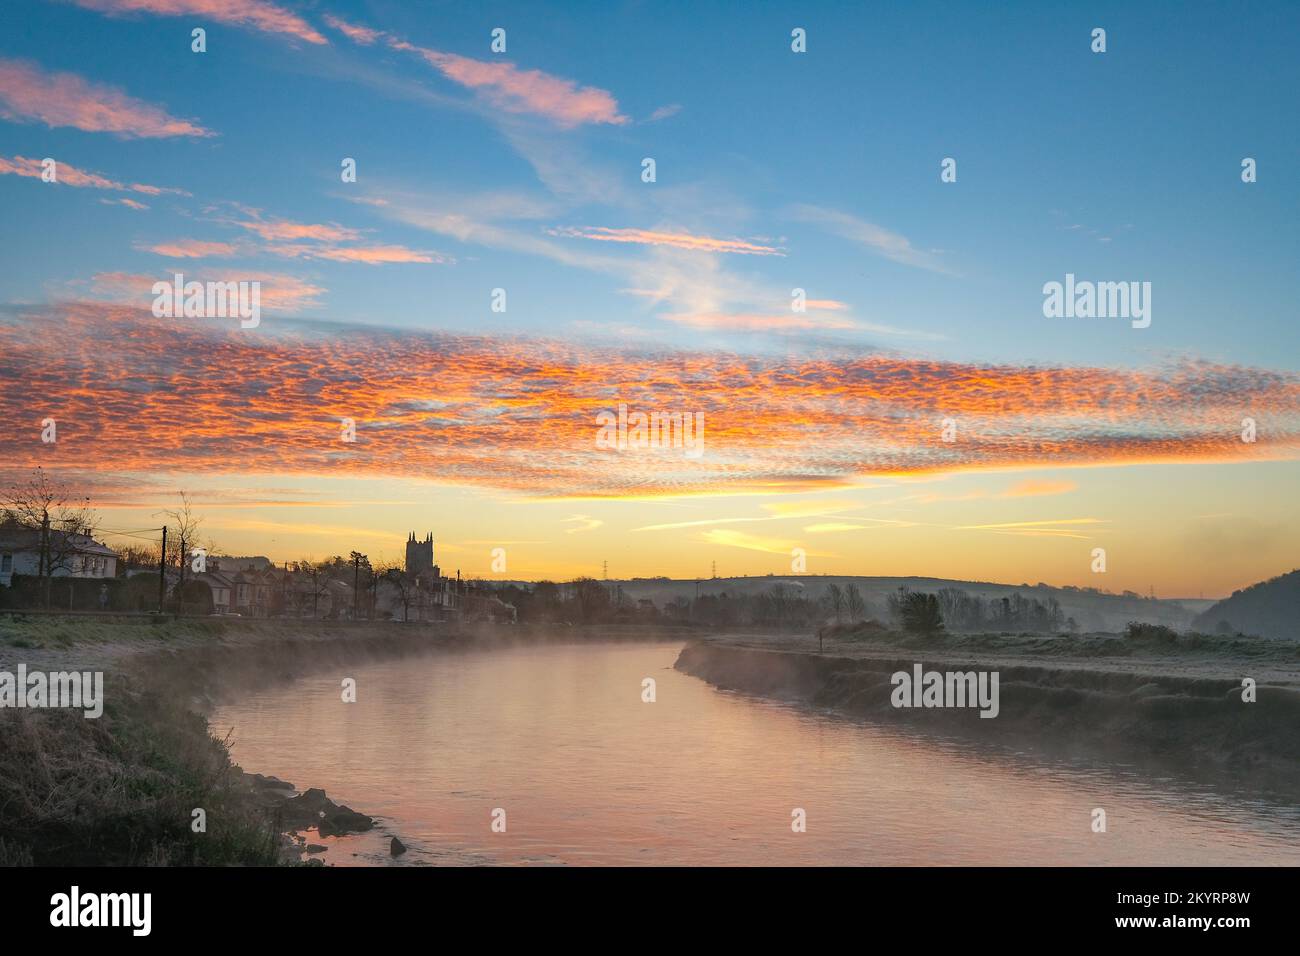 Wadebridge. Cornwall, UK. 2nd December 2022. UK Weather. December got off to a frosty start at Wadebridge in North Cornwall this morning, with temperatures dipping below zero on the river Camel this morning. Credit Simon Maycock / Alamy Live News. Stock Photo